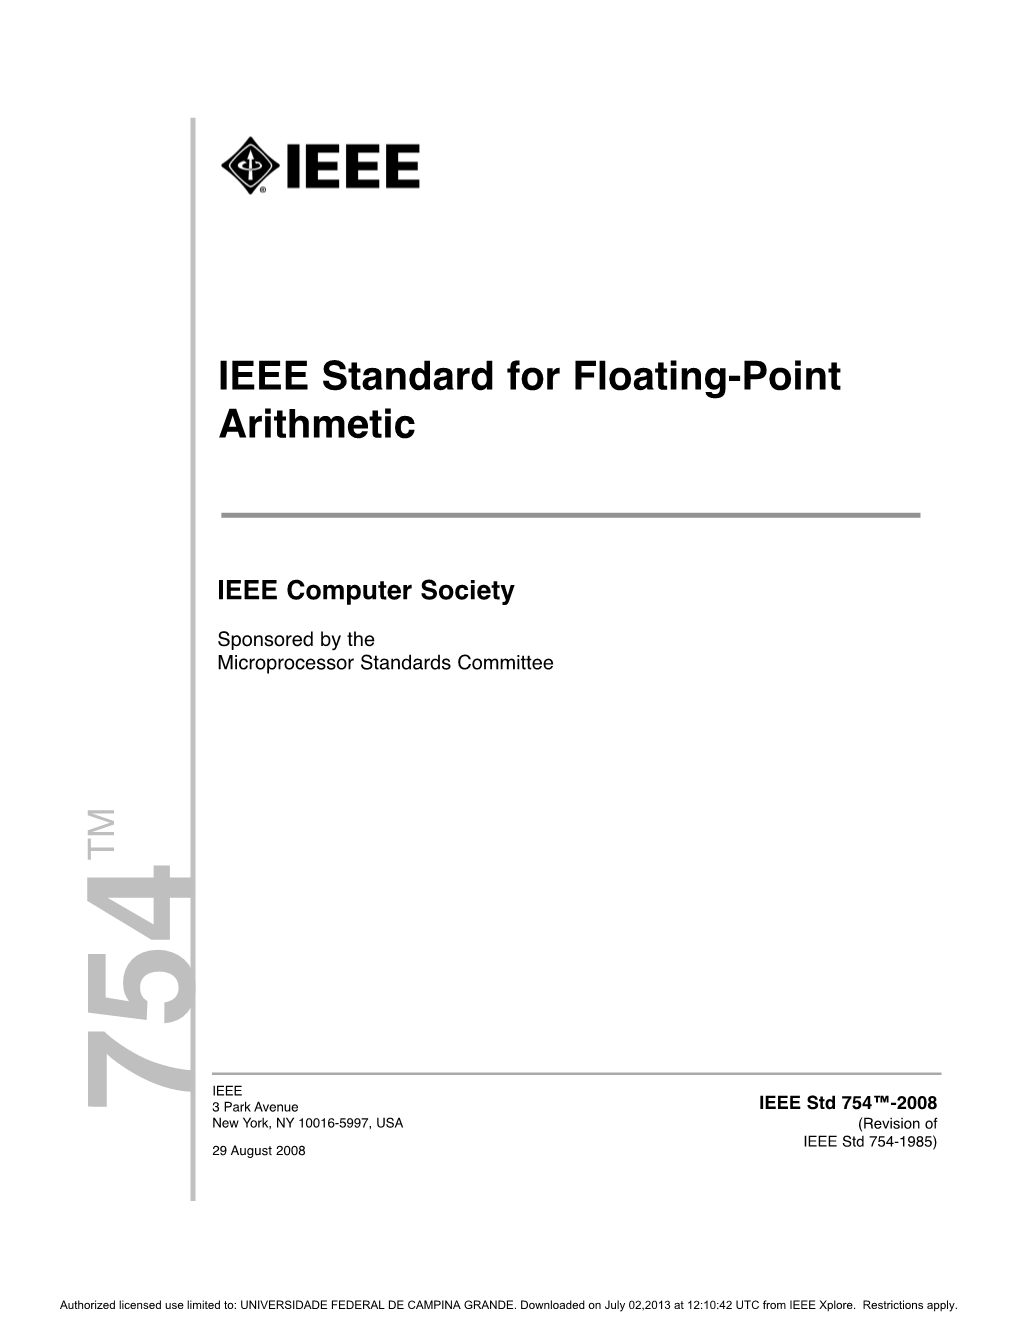 IEEE Standard for Floating-Point Arithmetic